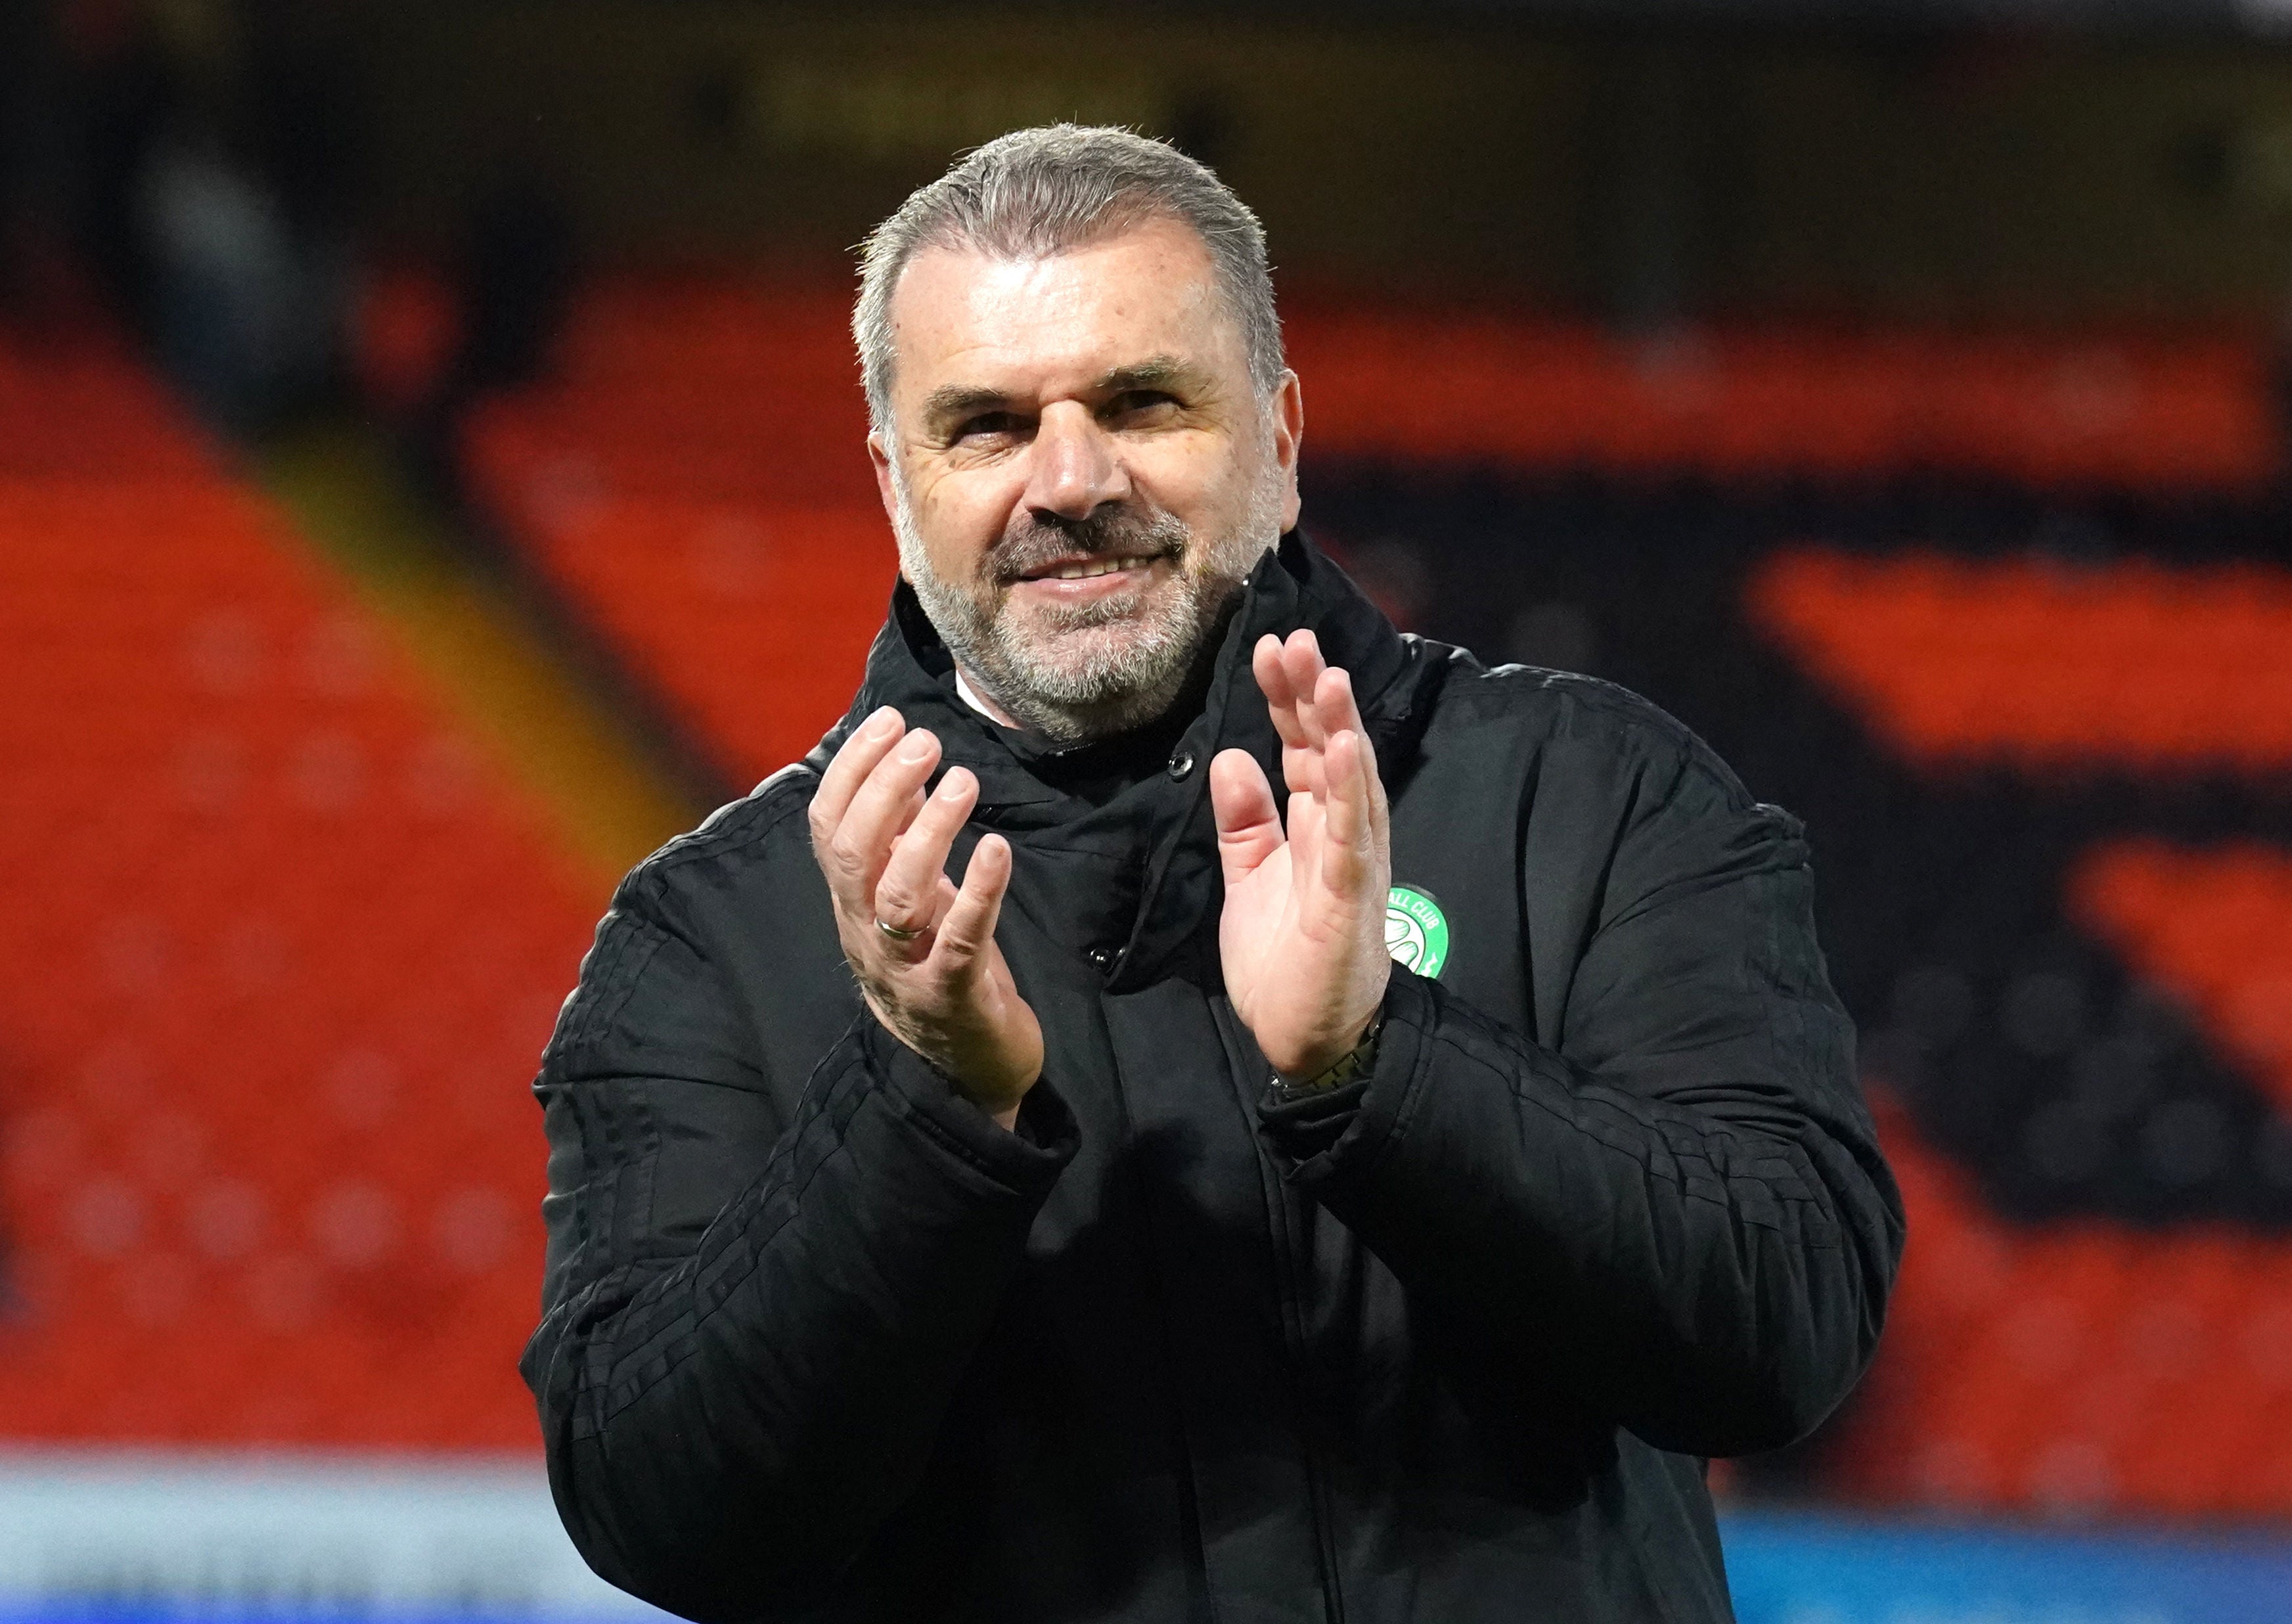 Postecoglou is fresh from cup success with his Glasgow side